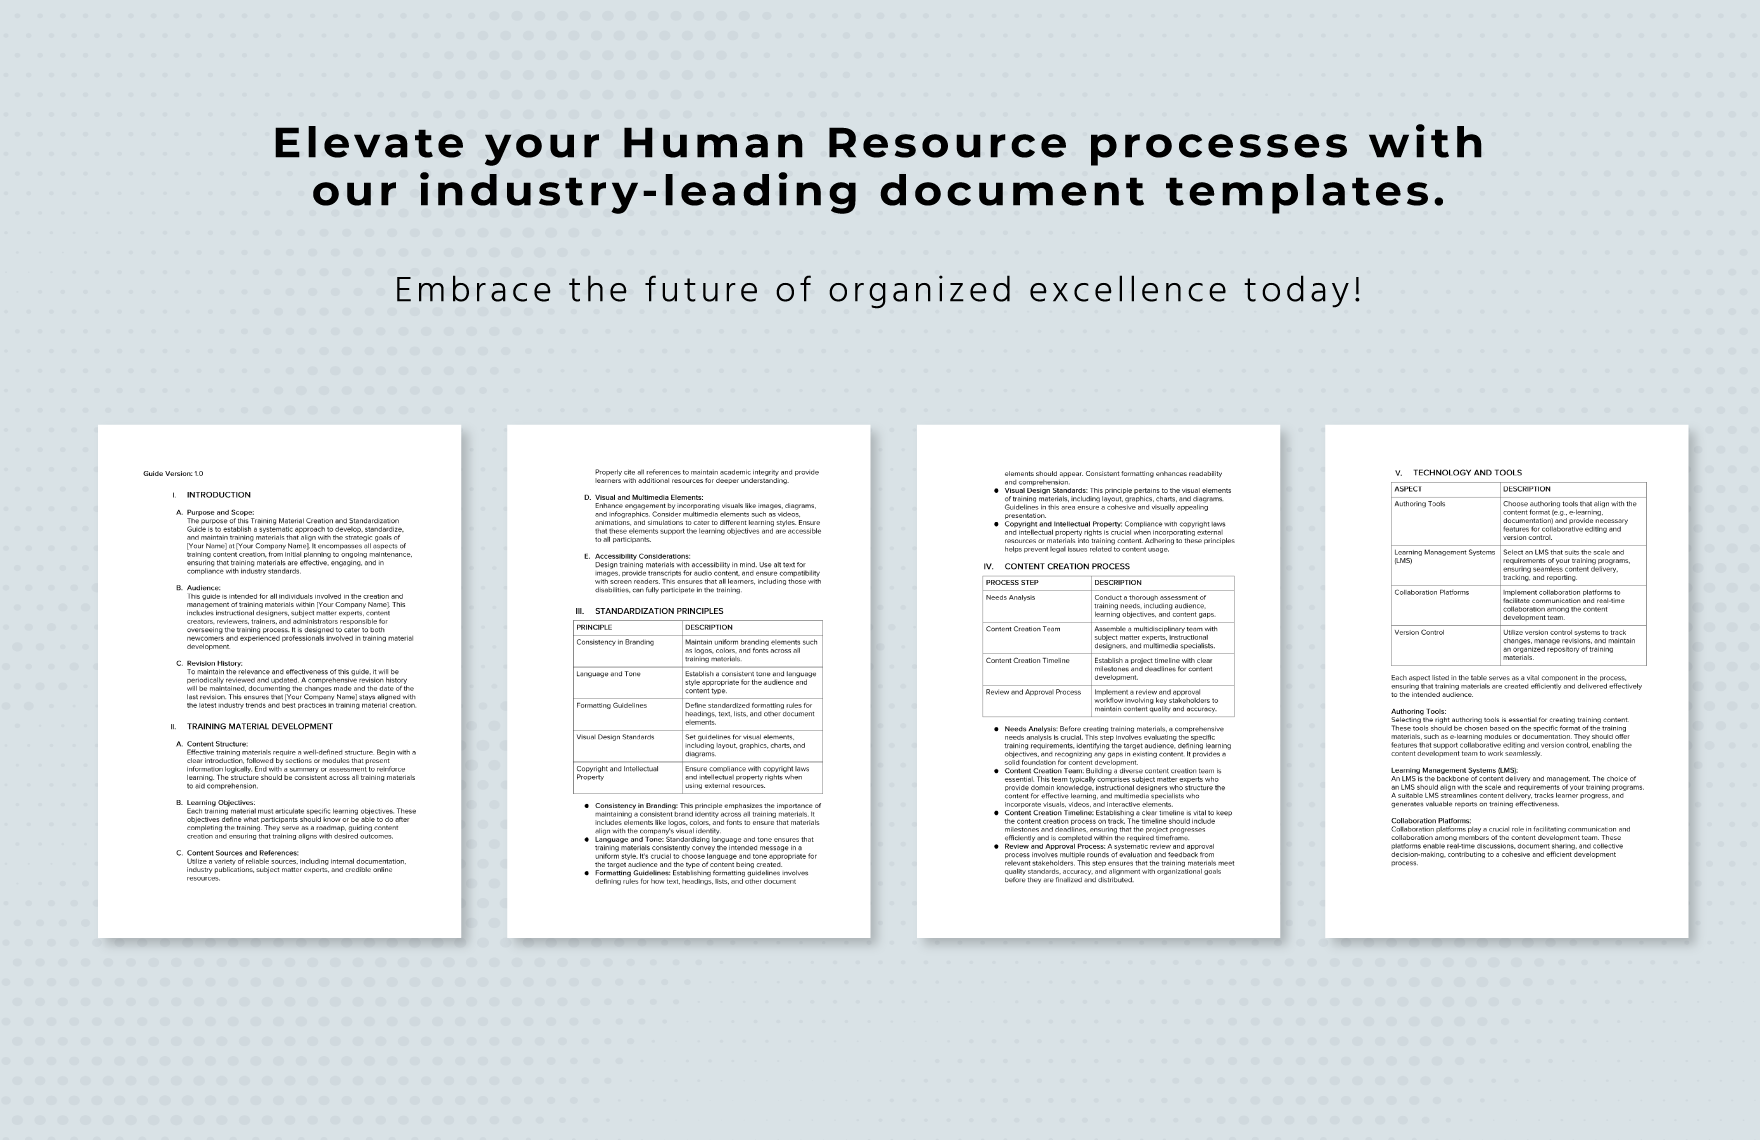 Training Material Creation & Standardization Guide HR Template